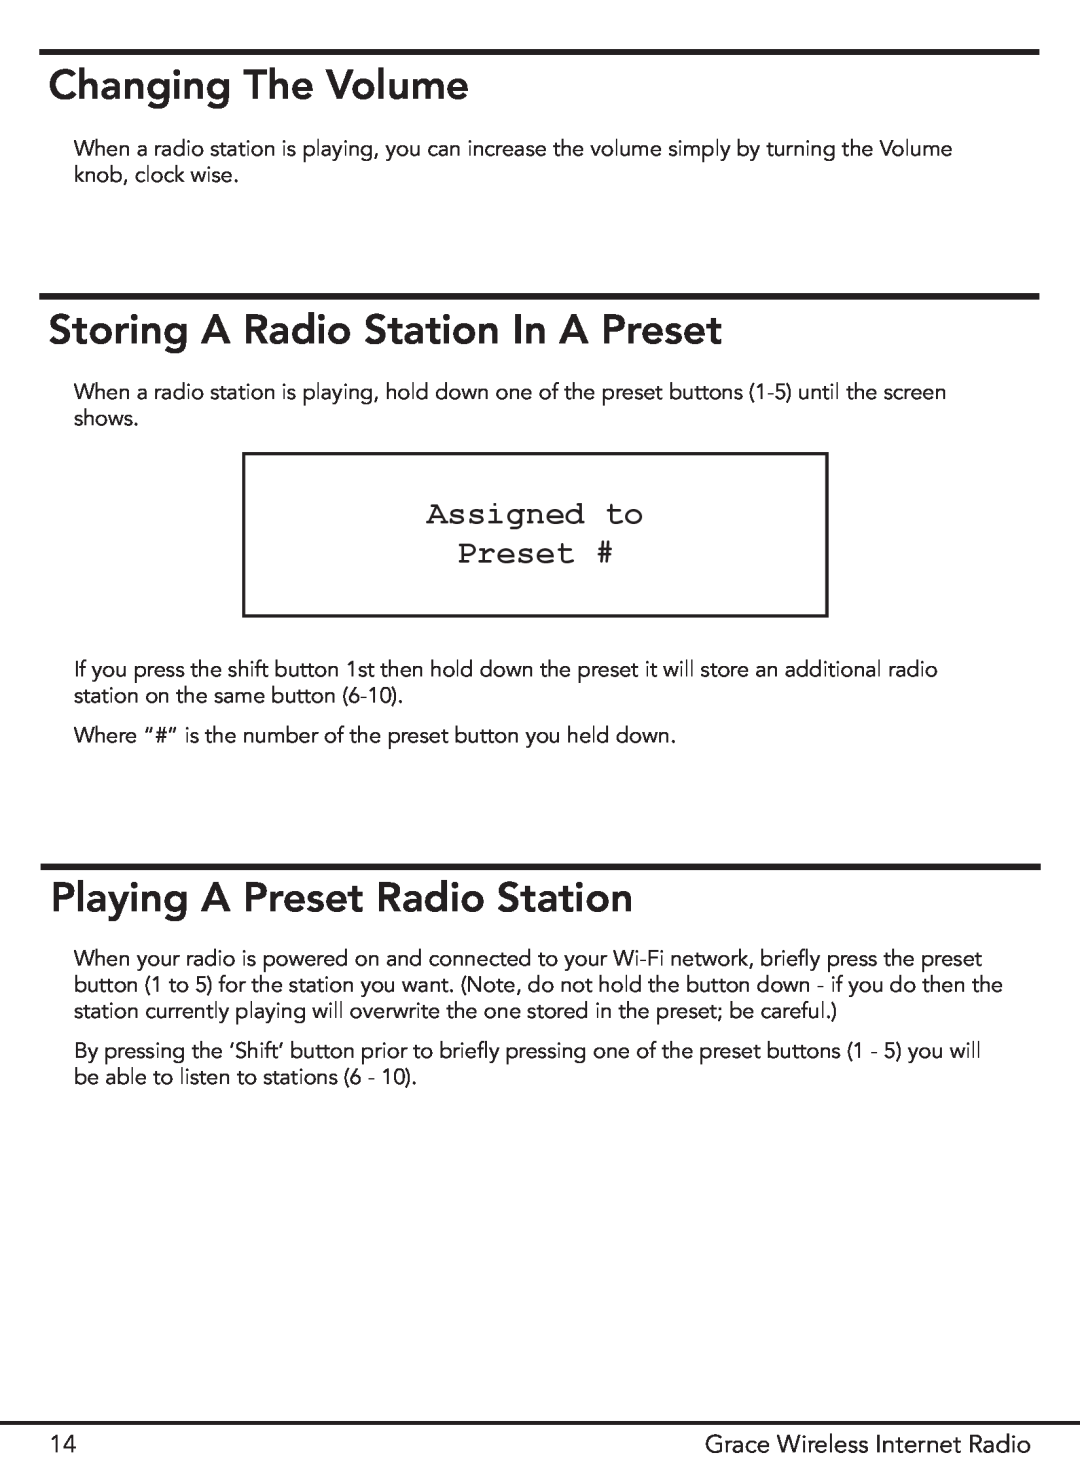 Grace GDI-IR2000 manual Changing The Volume, Storing A Radio Station In A Preset, Playing A Preset Radio Station 